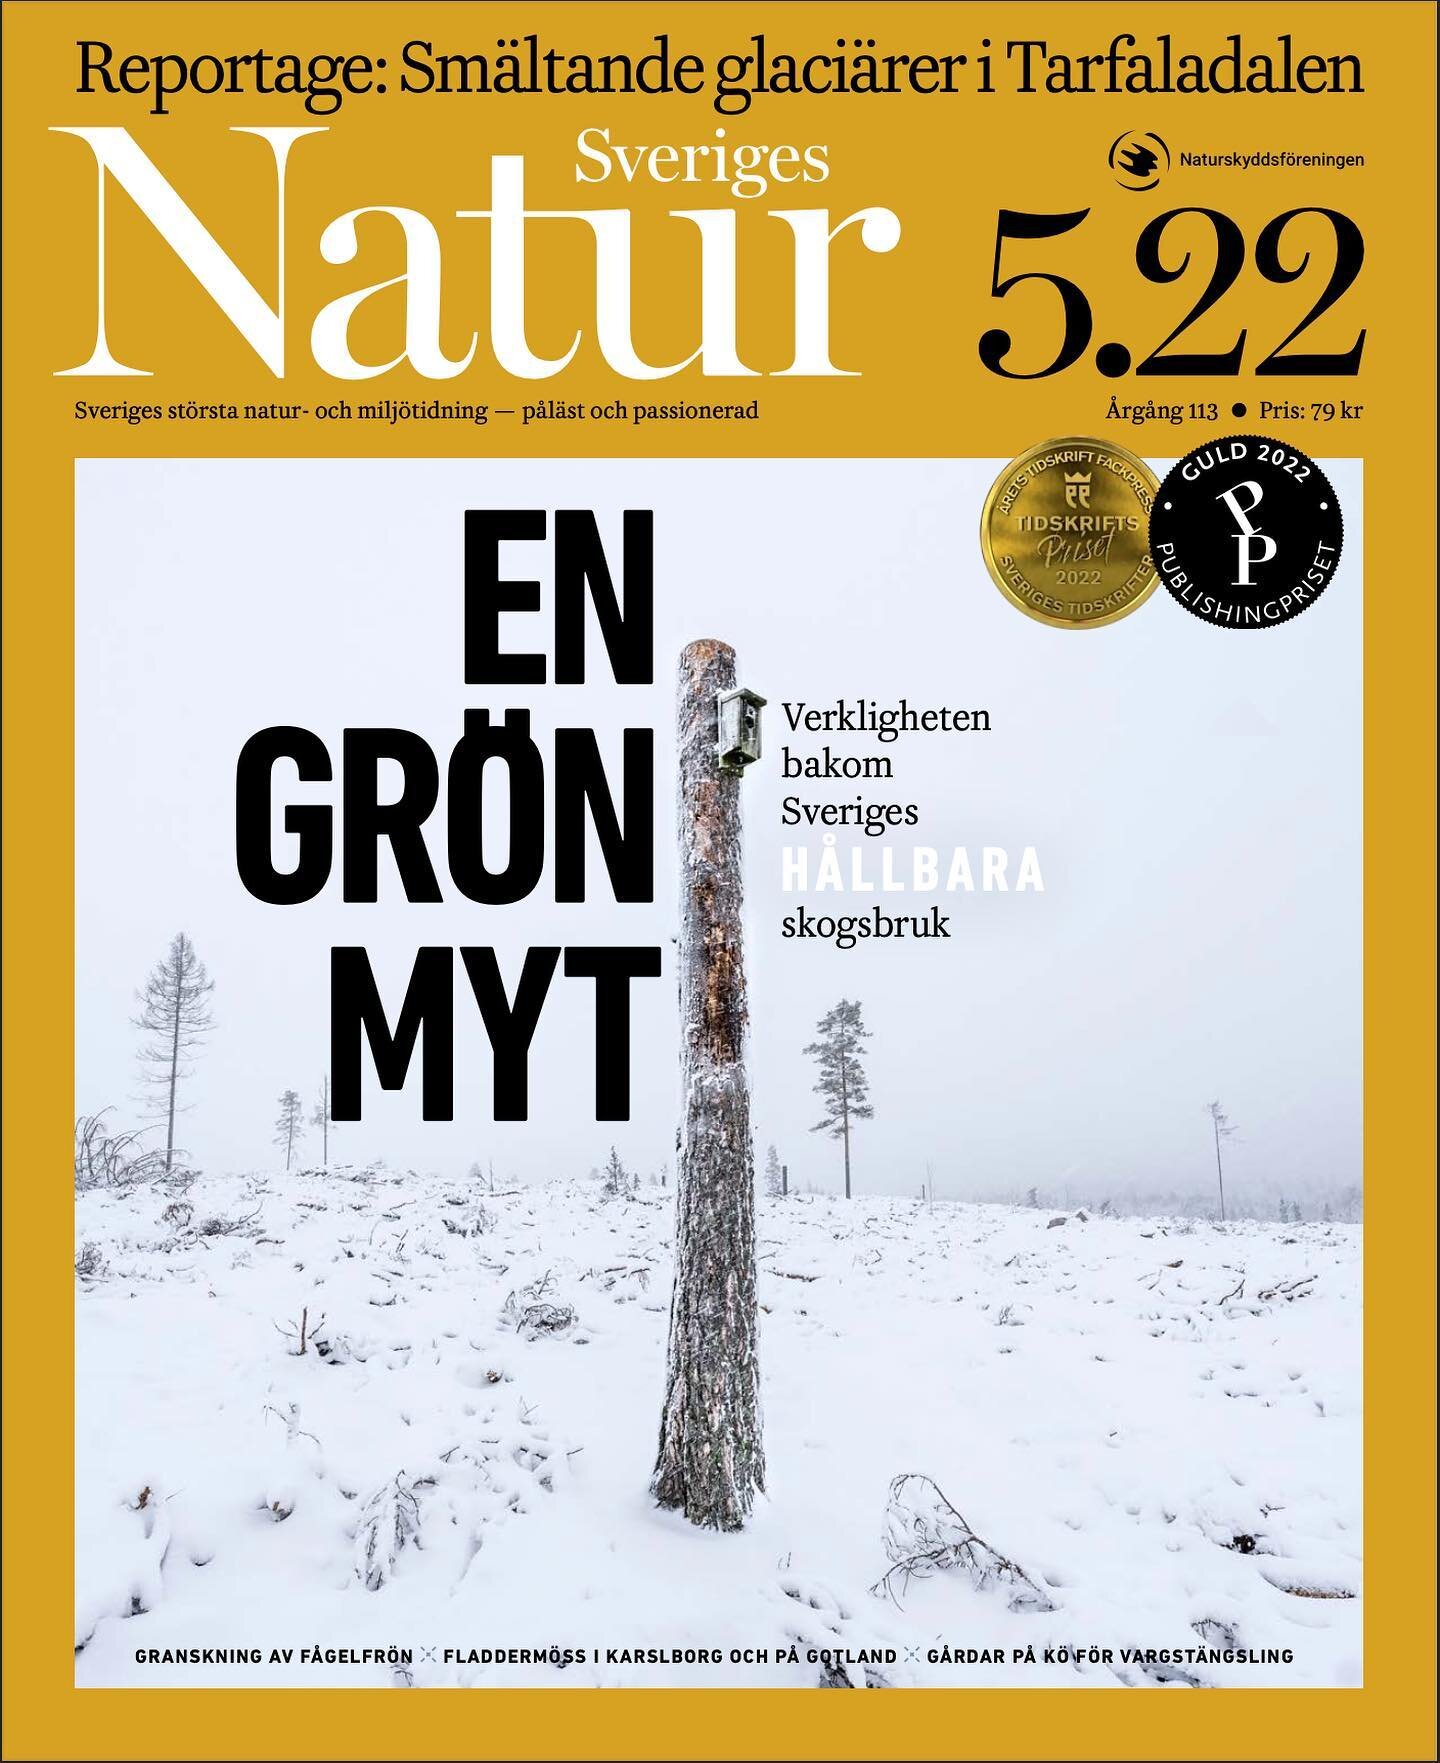 It was with mixed feelings that I received the latest issue of Swedish Nature, the country's largest nature- and conservation magazine. I am both proud and grateful to have photographed and written the cover story, A GREEN MYTH, which is essentially 